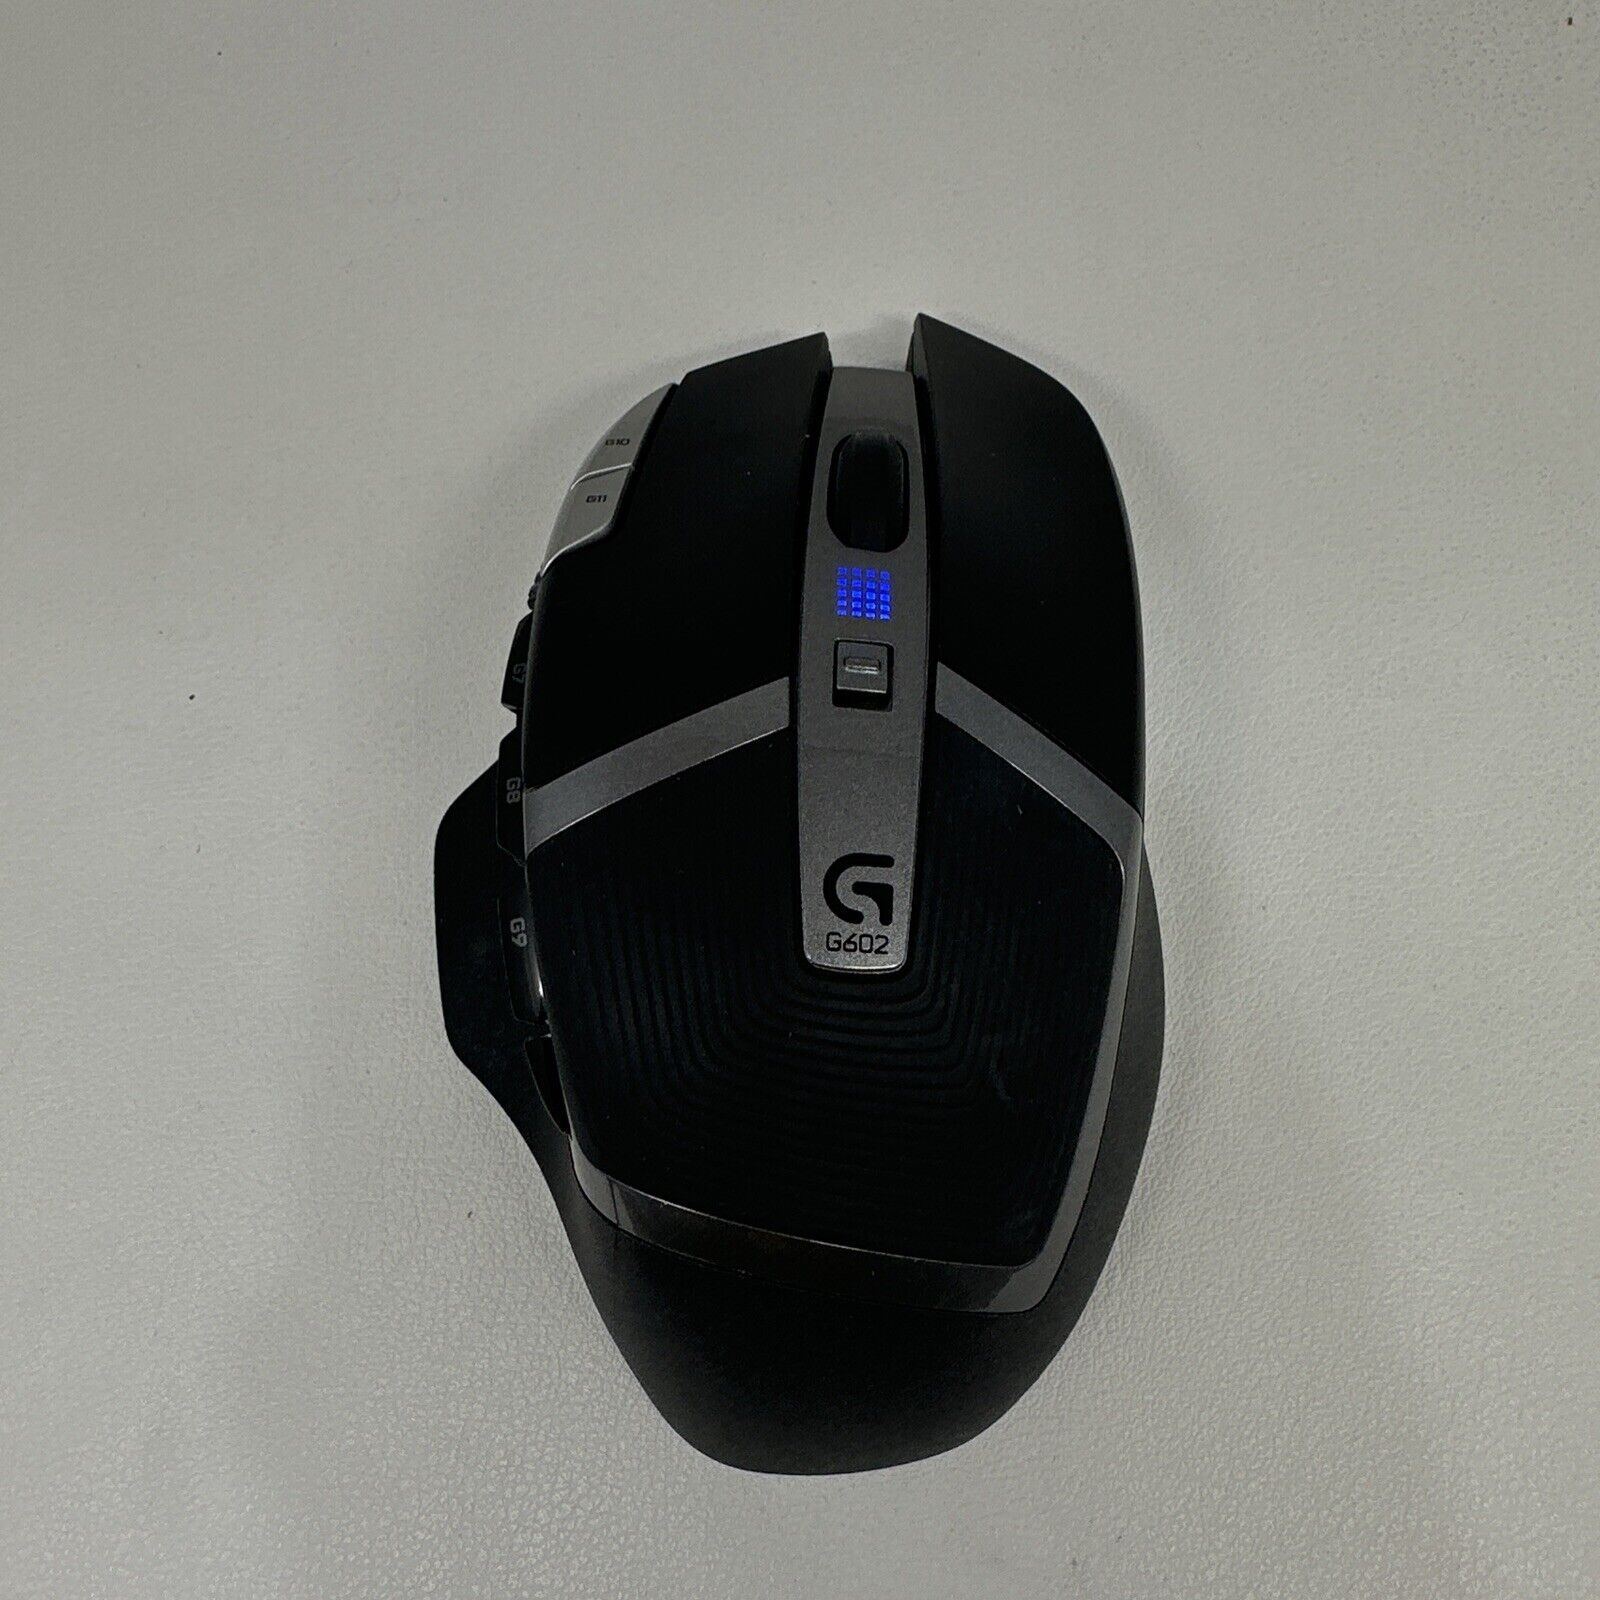 Logitech G602 Wireless Gaming Mouse (No dongle/cable) Mouse Turns On